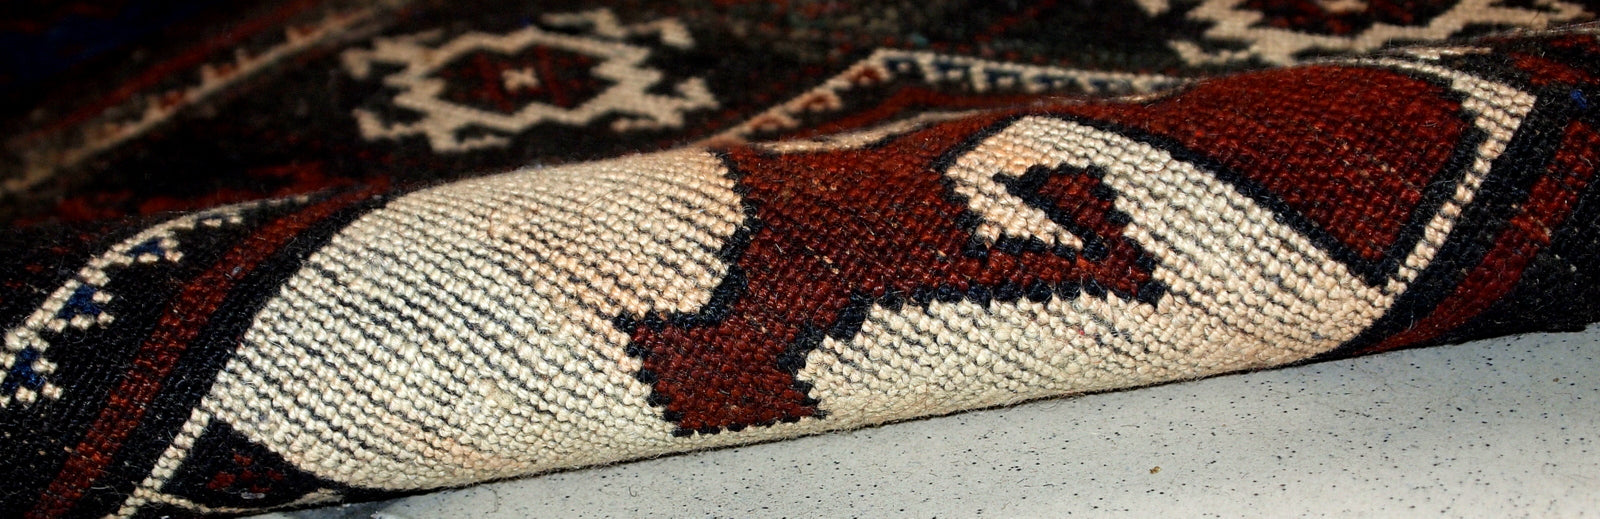 Reverse side of the vintage Afghan Baluch rug showcasing its handcrafted details and woolen texture.